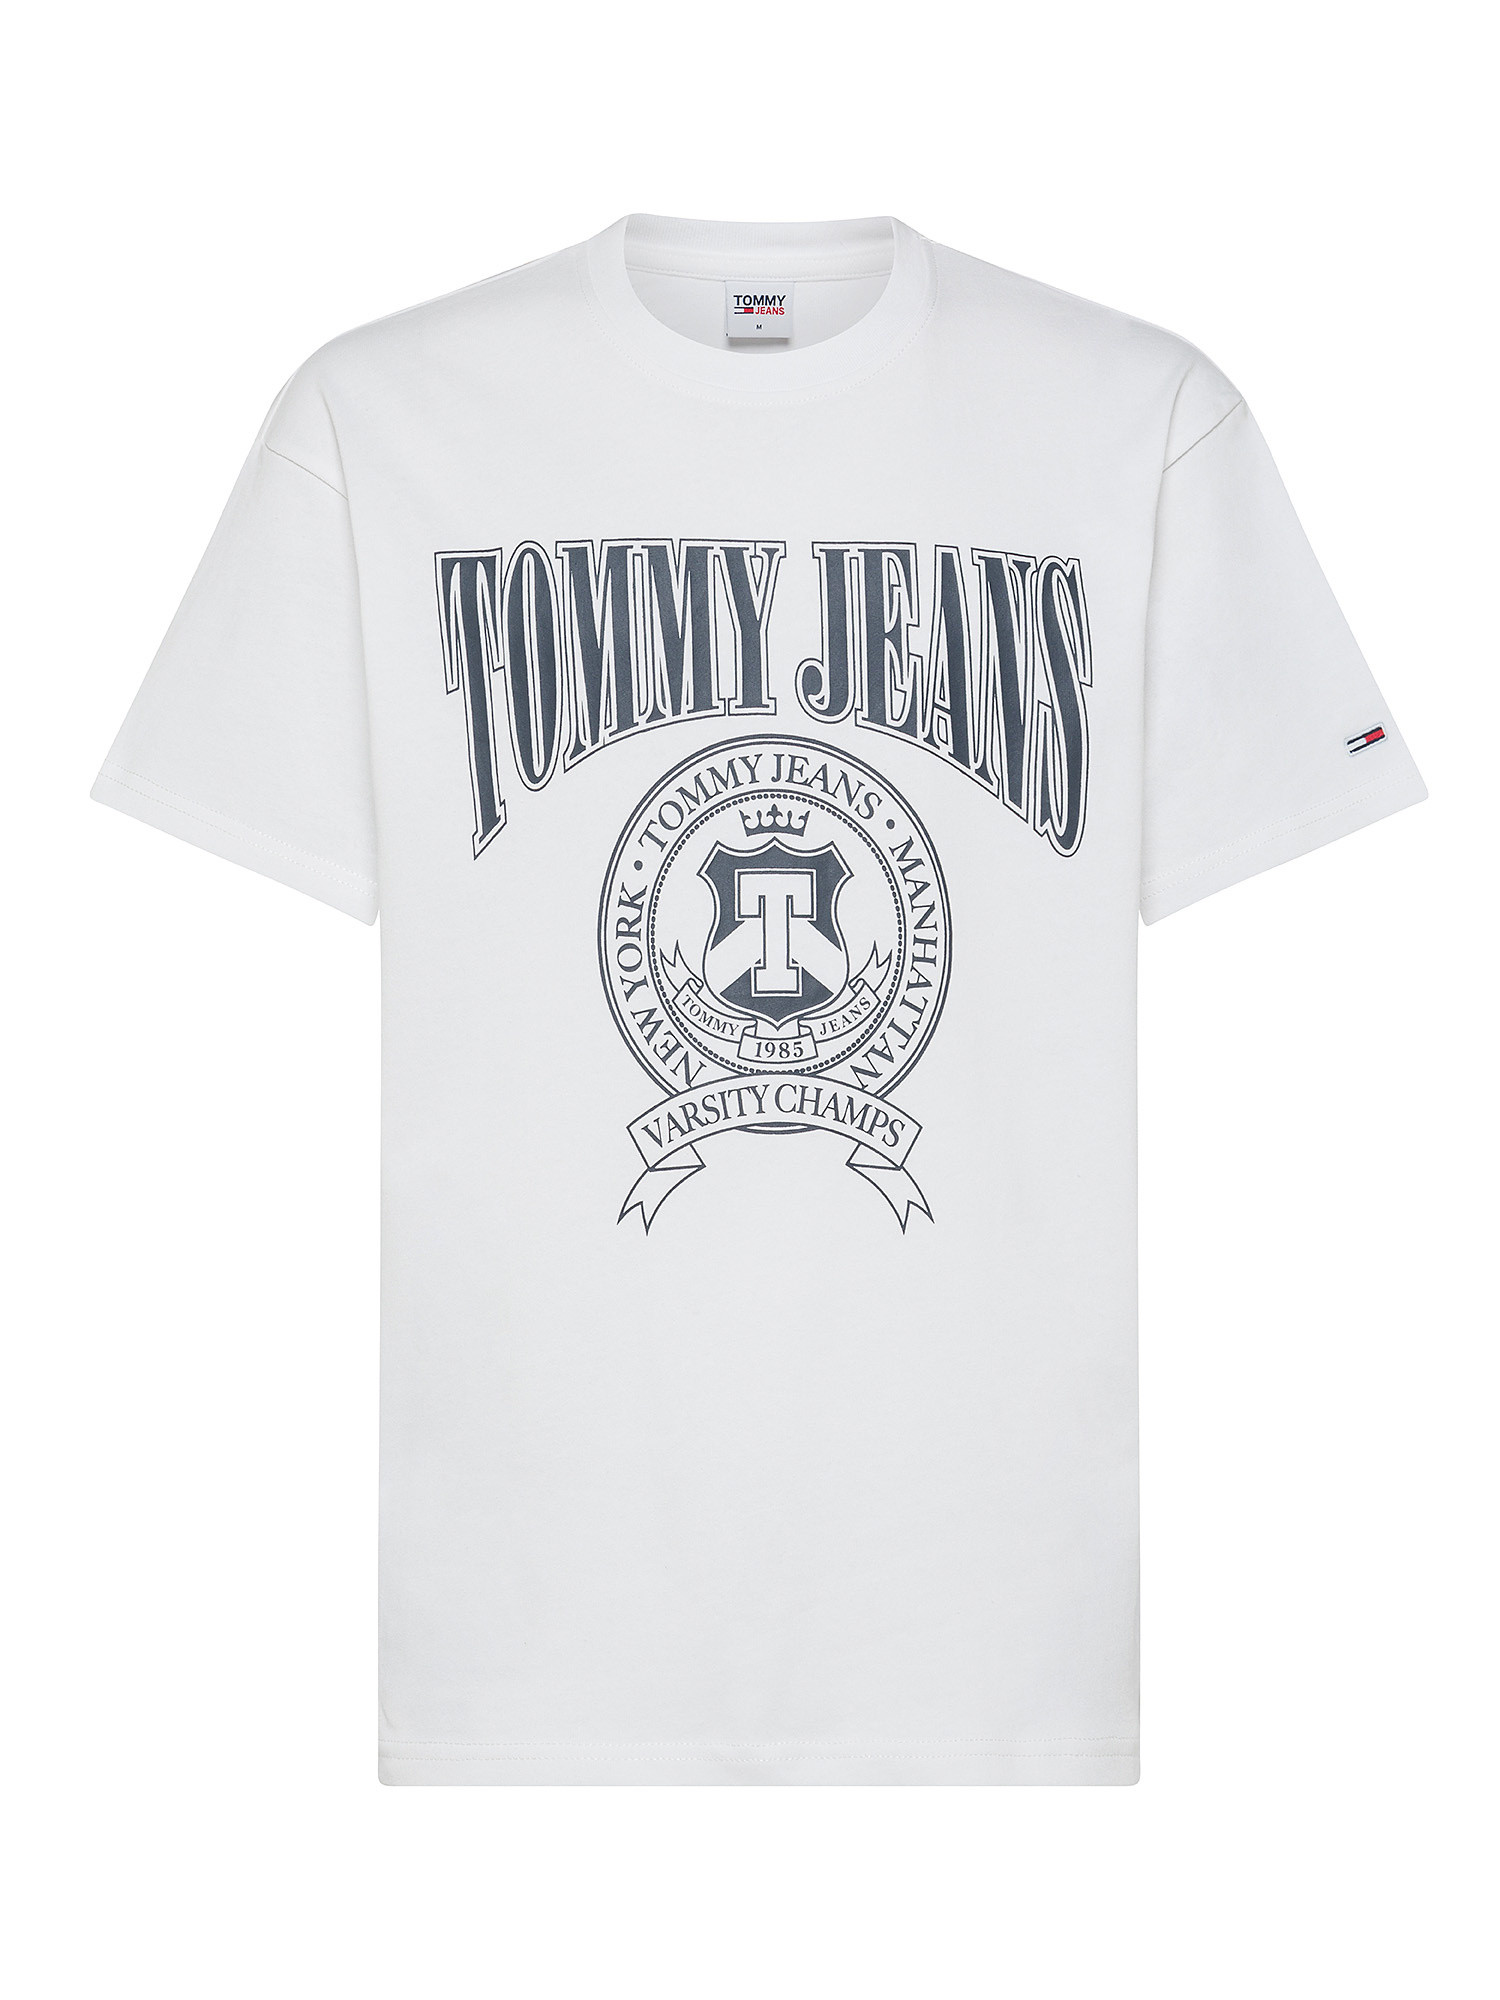 Tommy Jeans - Crew neck cotton T-shirt with print and logo, White, large image number 0